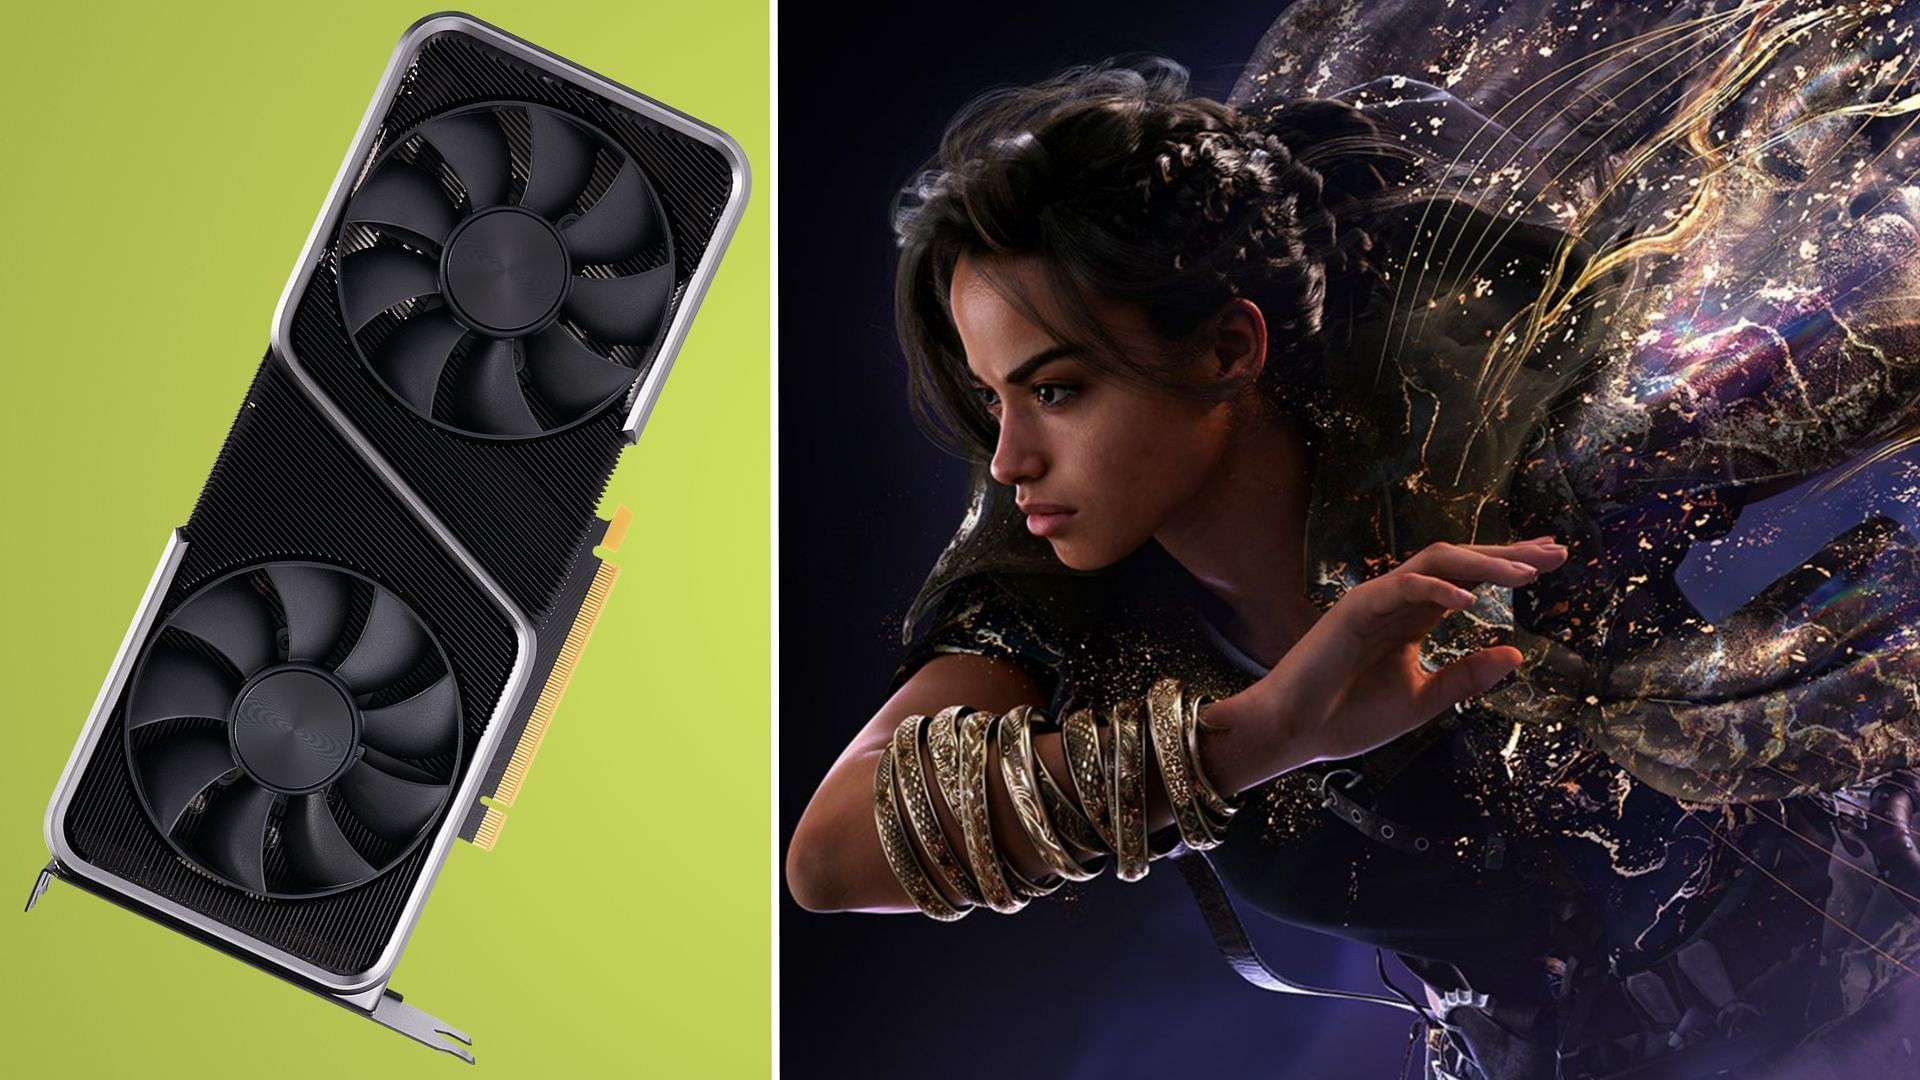 The RTX 3070 is an ideal card for playing Forspoken at 1440p (Image via Sportskeeda)